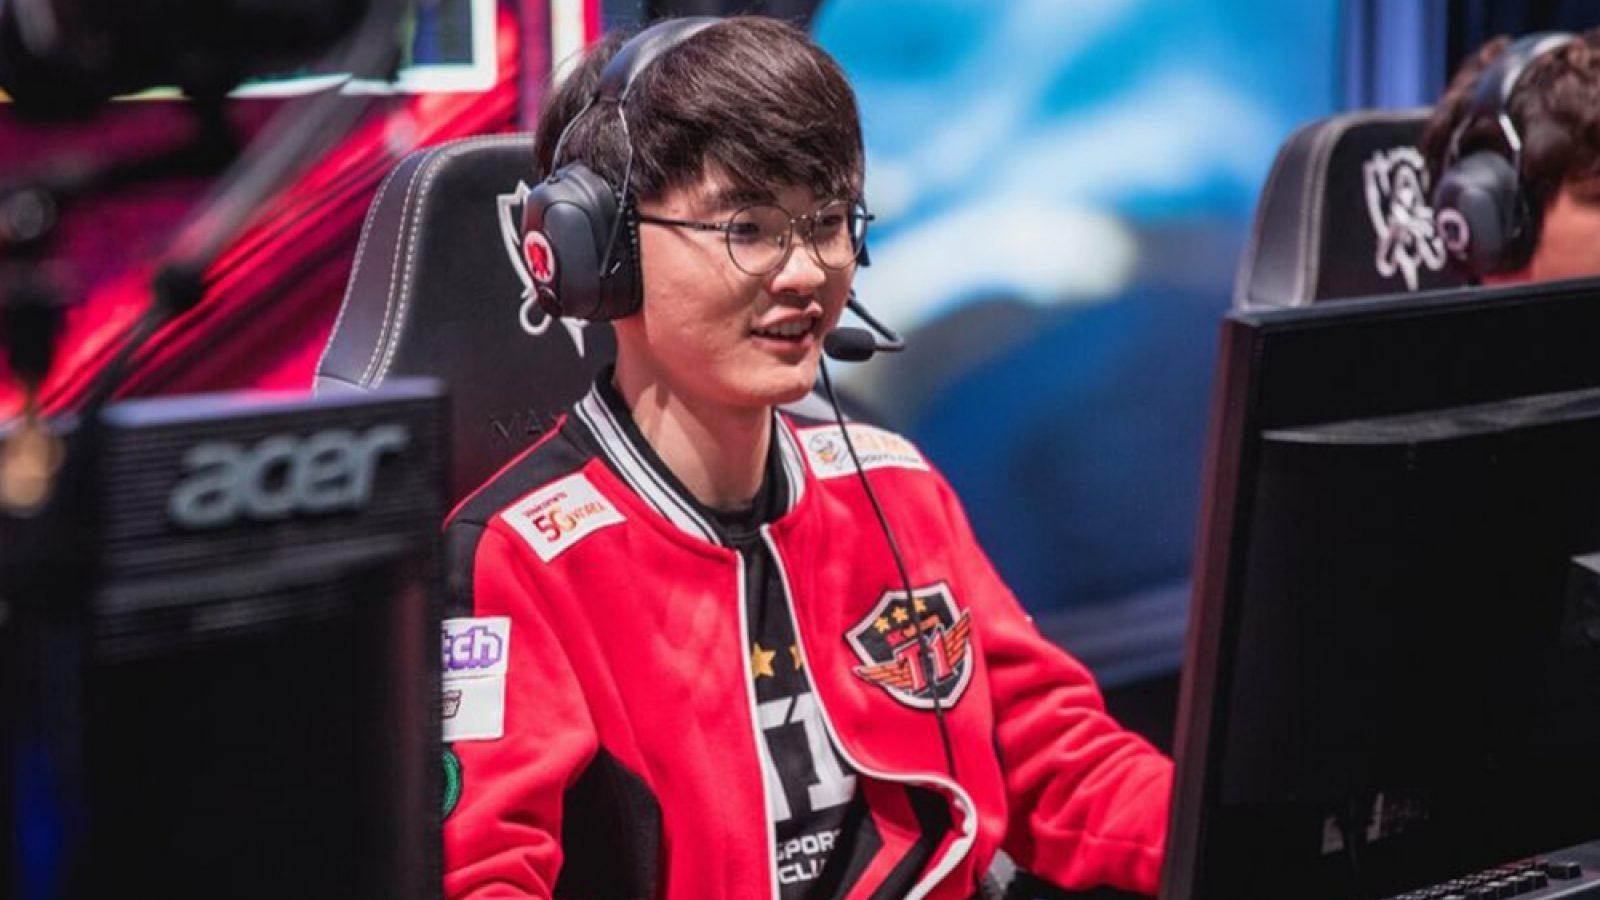 A (complex) network of institutions: Faker, playing League of Legends